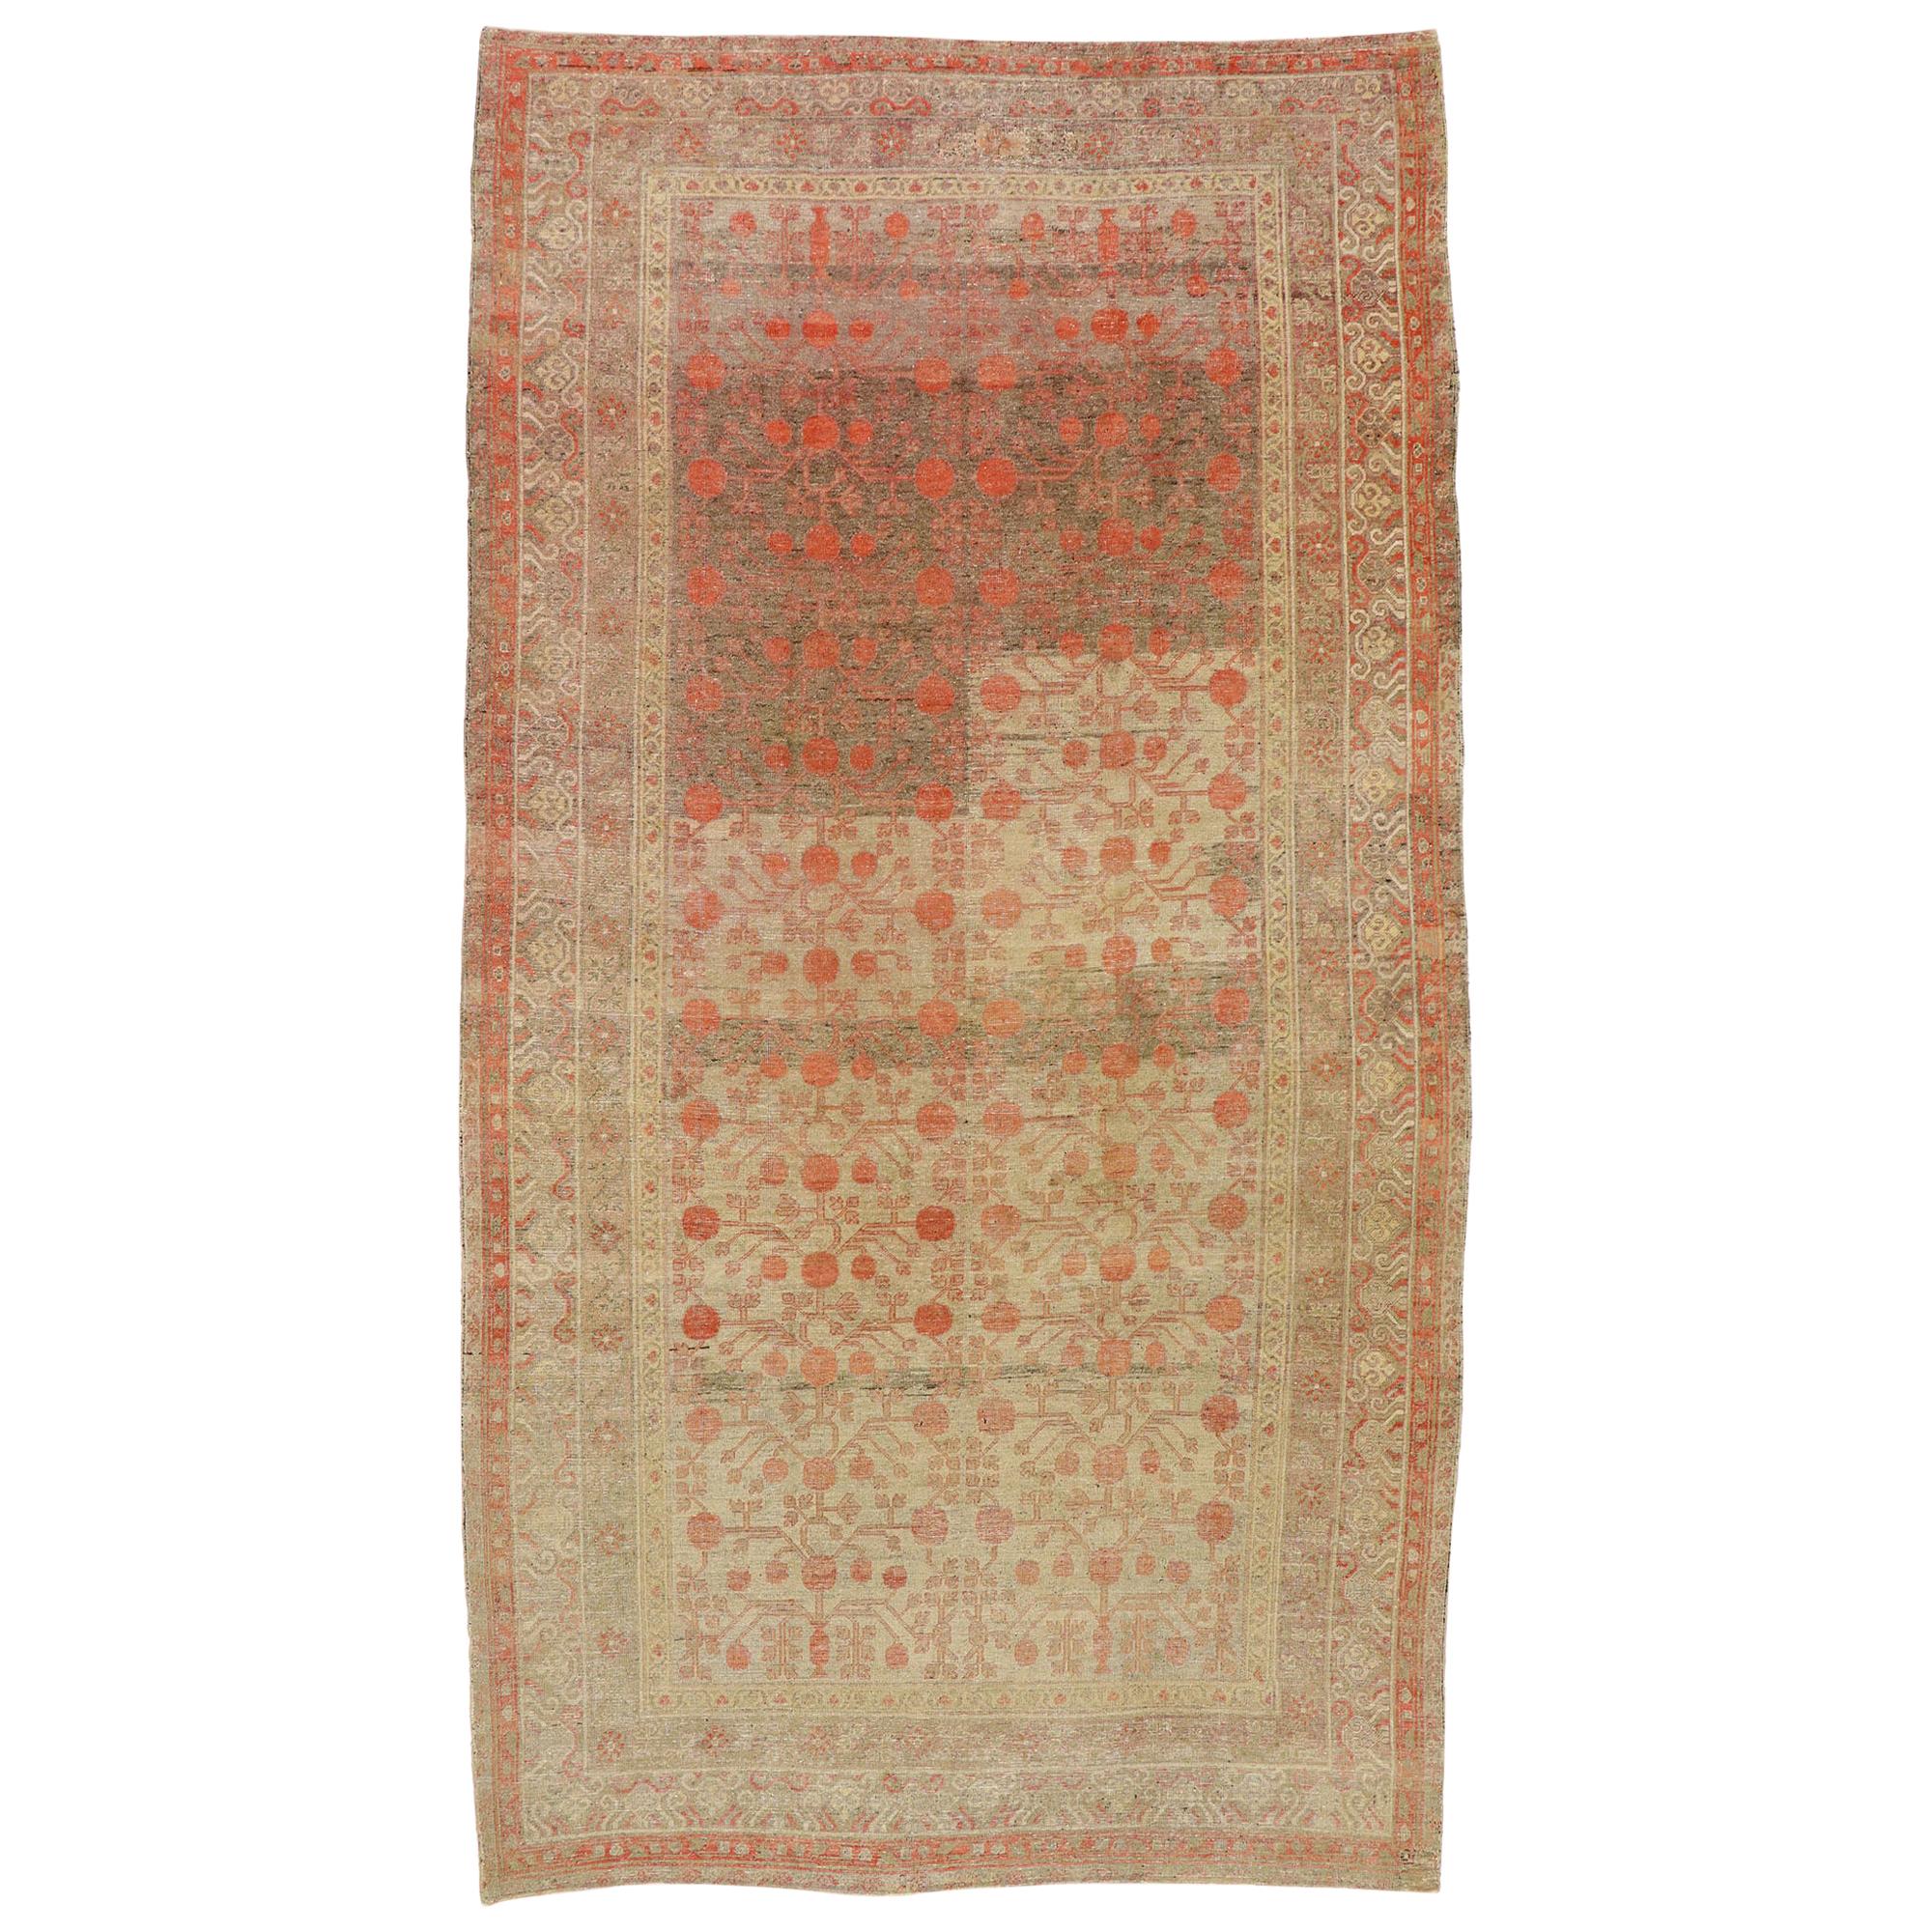 Distressed Antique Khotan Gallery Rug with Pomegranate Design